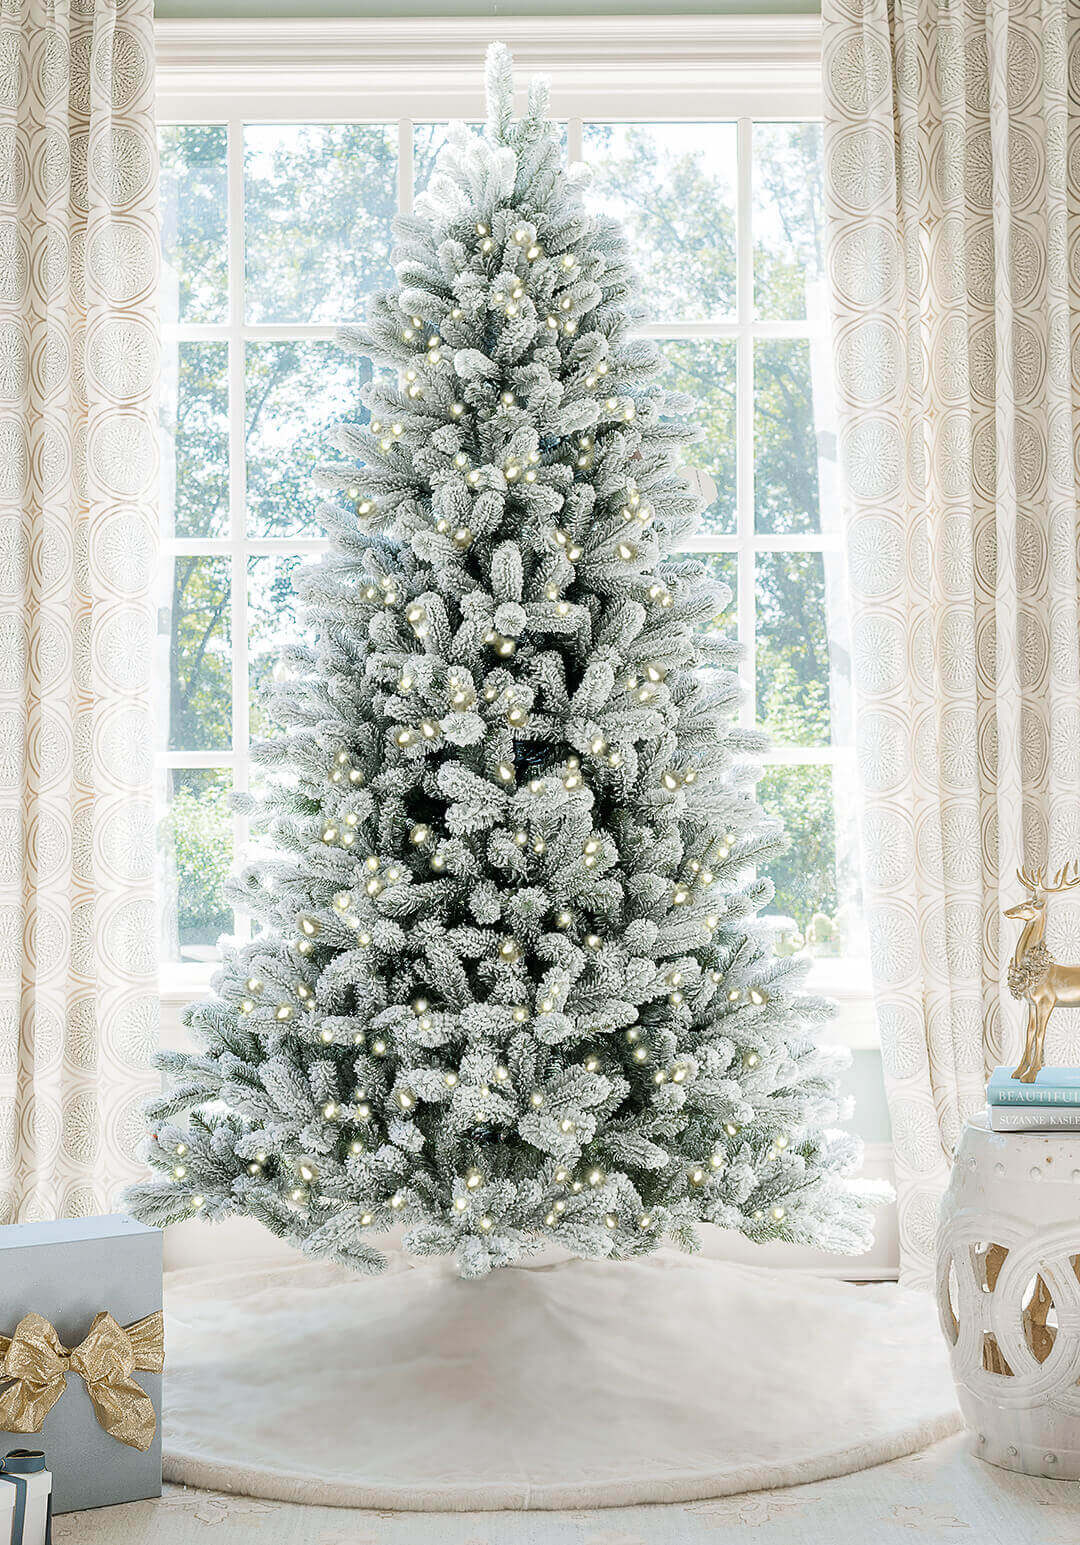 King of Christmas 10' King Flock® Artificial Christmas Tree with 1250 Warm White LED Lights